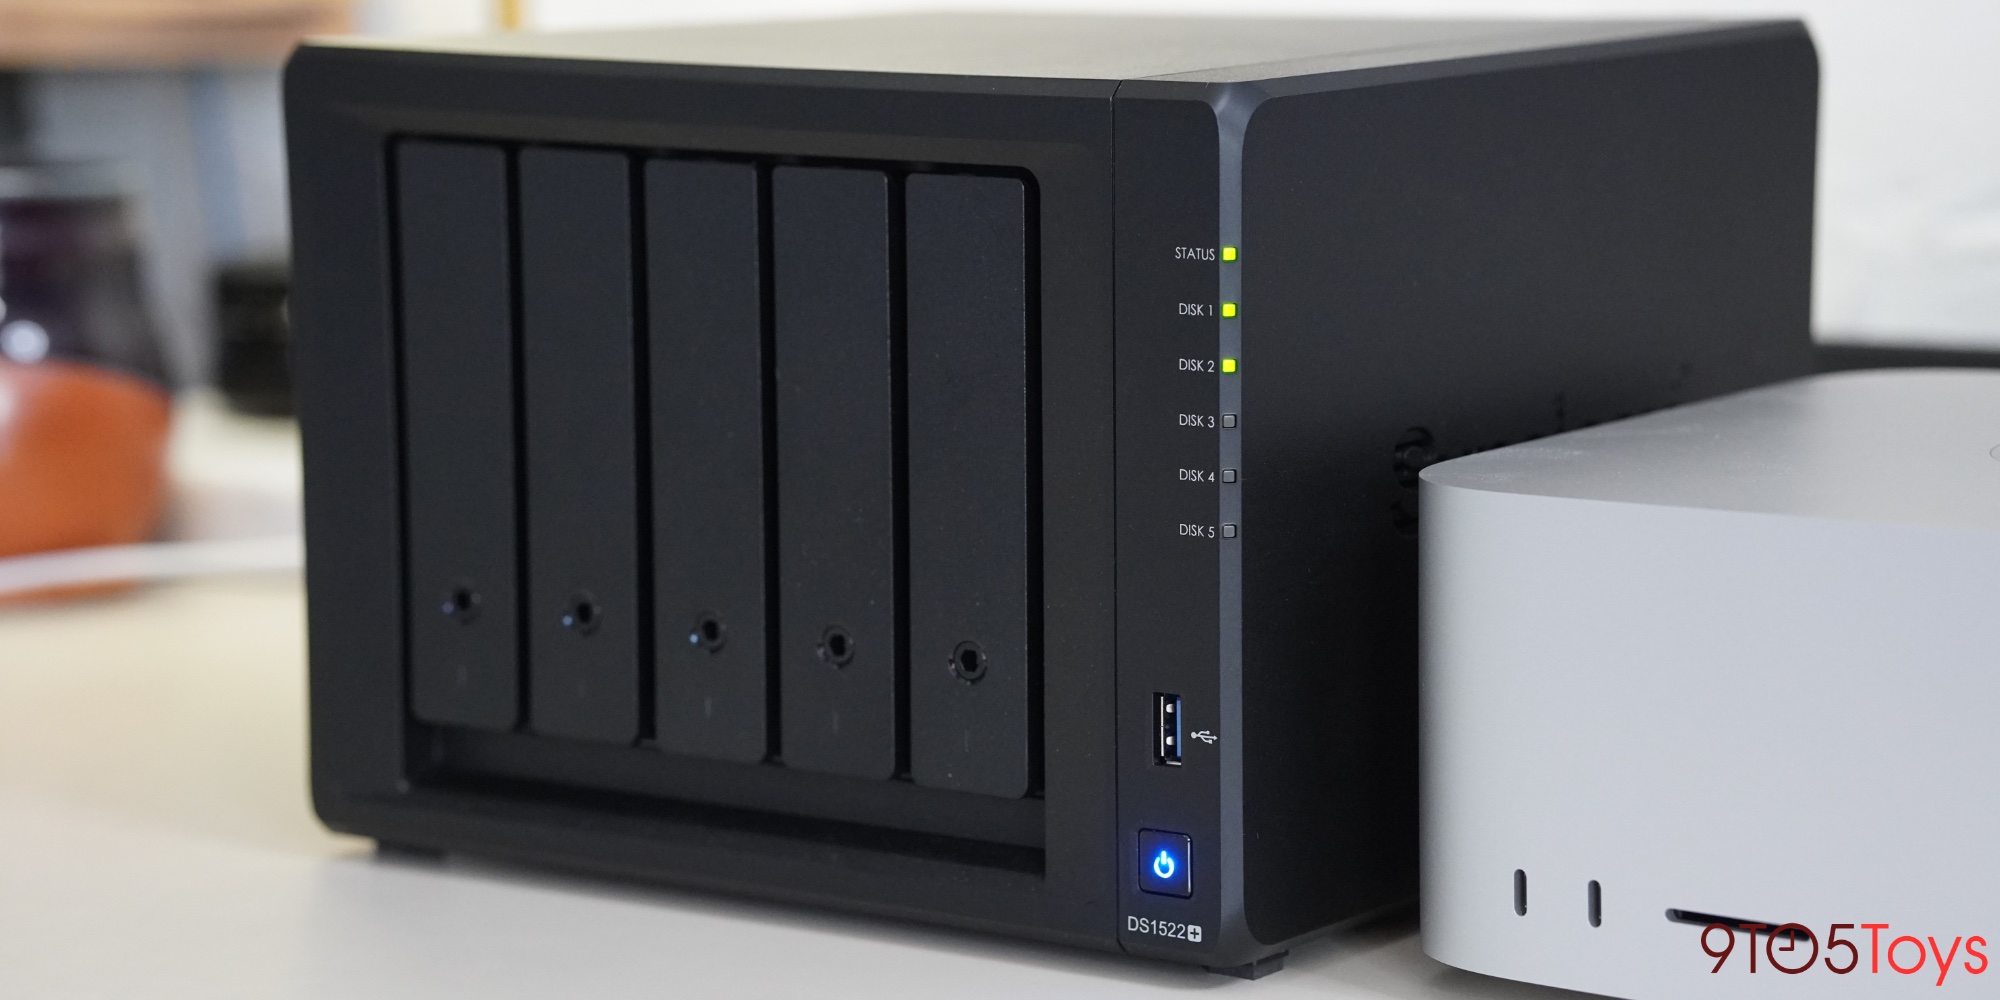 https://9to5toys.com/wp-content/uploads/sites/5/2022/08/Synology-DS1522.jpg